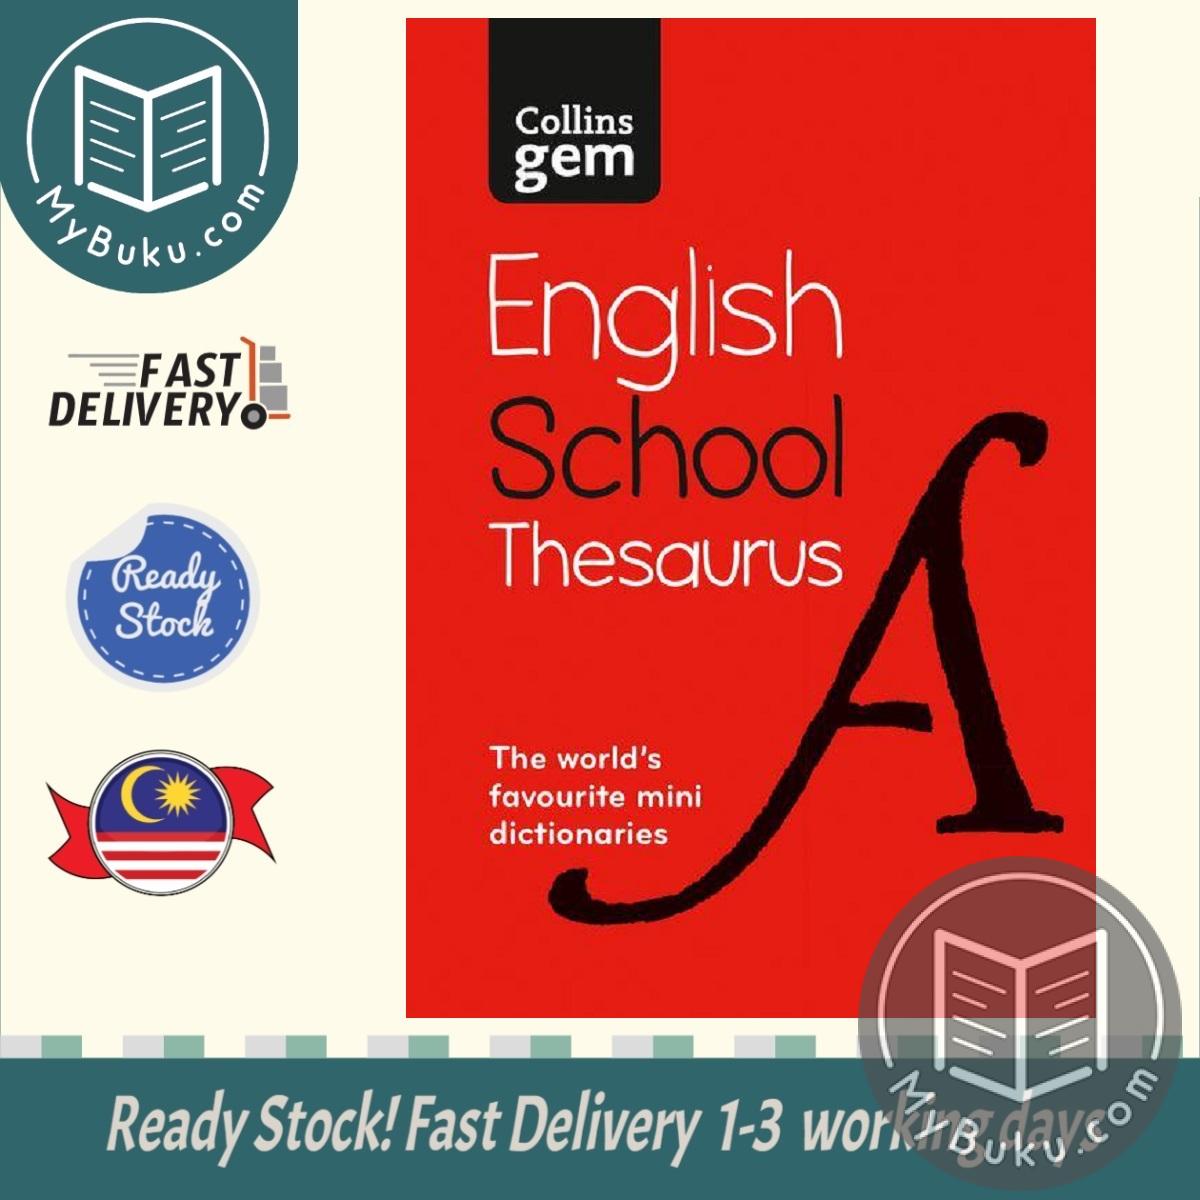  Gem School Thesaurus : Trusted Support for Learning, in a Mini-Format - 9780008321185 - HarperCollins 